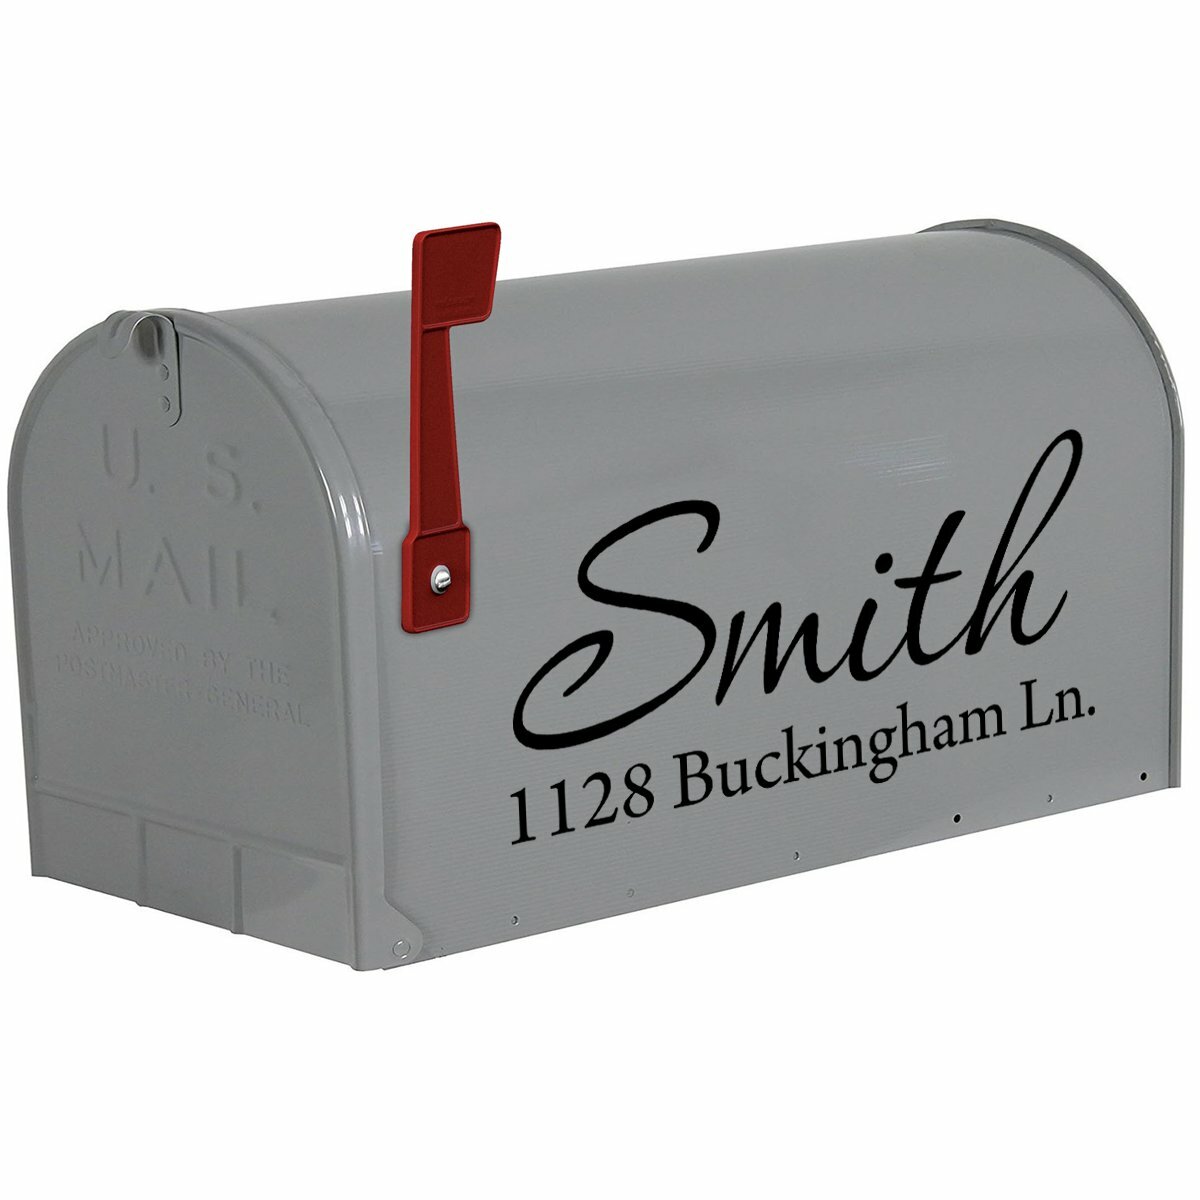 Mailbox Letters Decal 2 Piece Set Number and Street Name Family Name Custom 